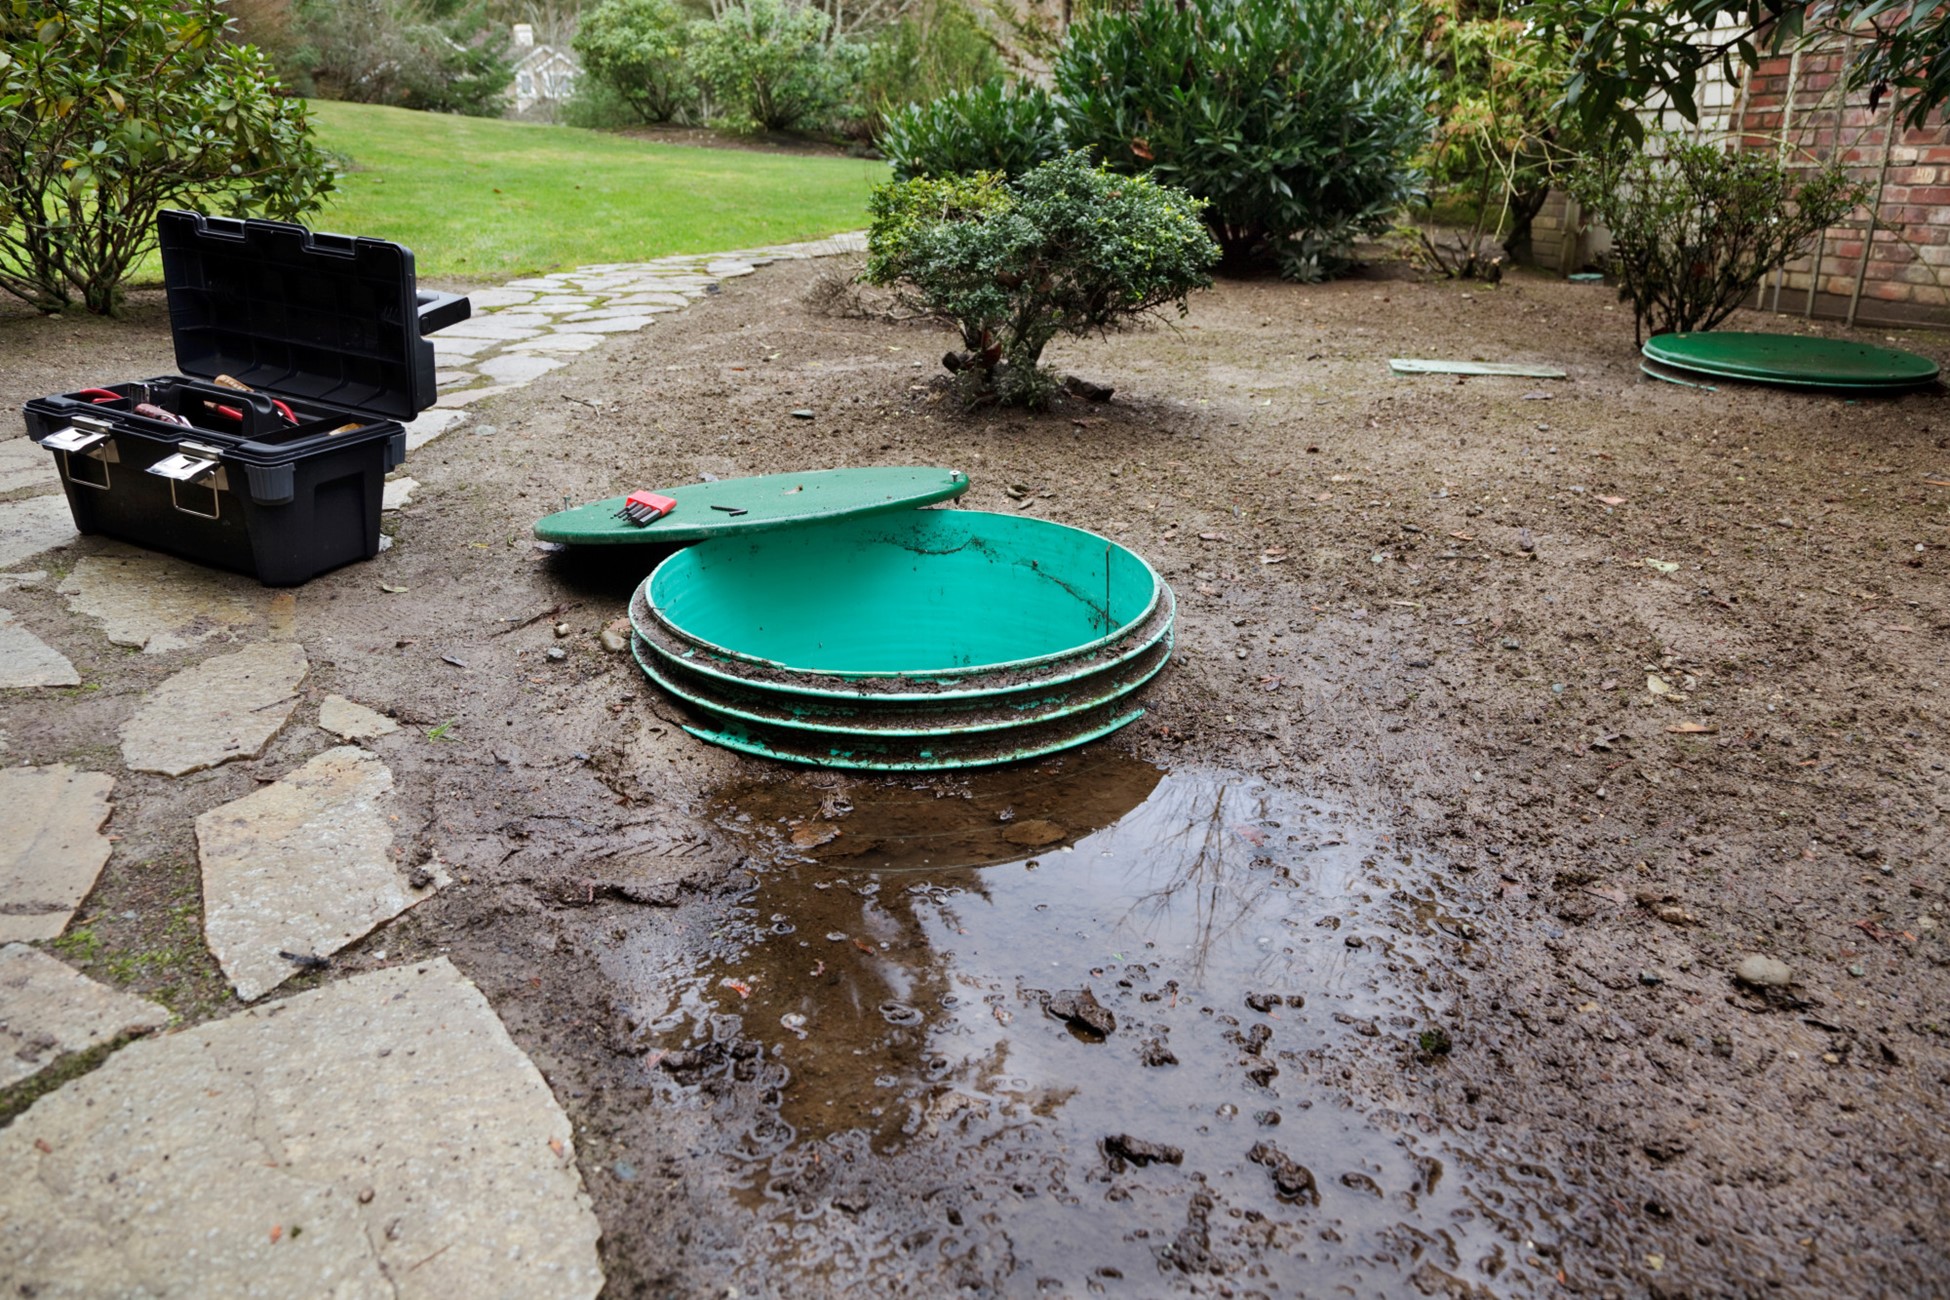 What You Should Know About Your Homes Septic System